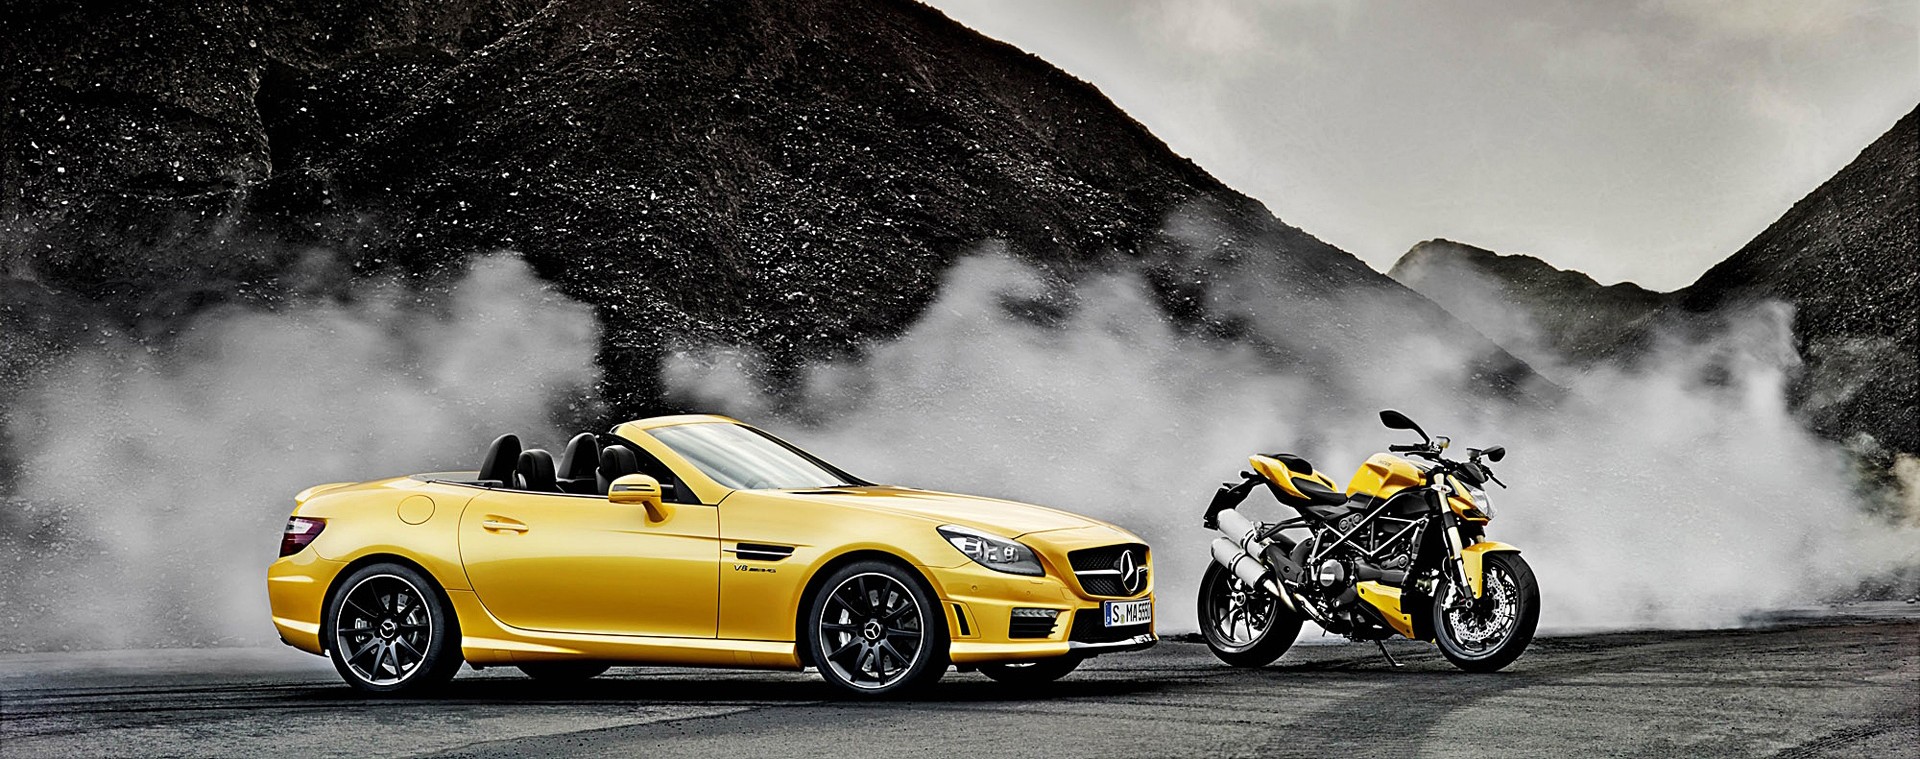 Cars and motorcycles